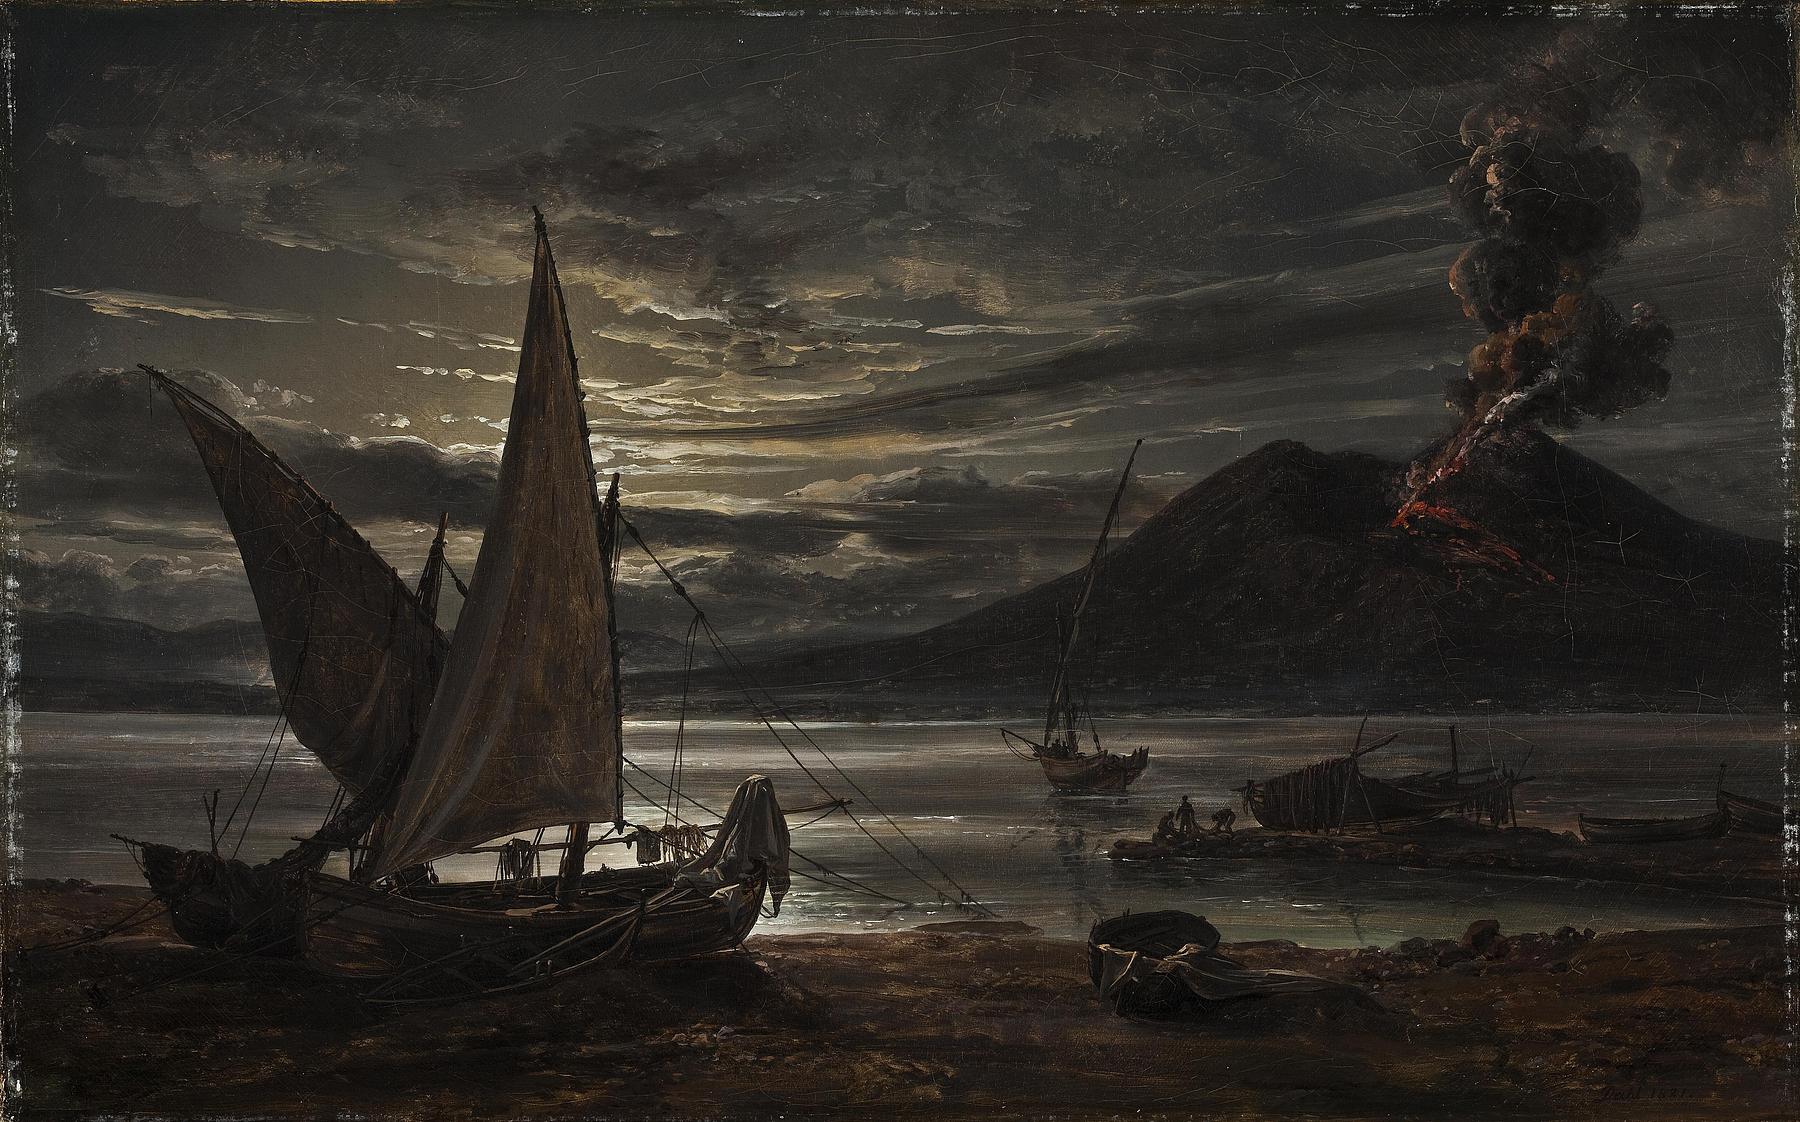 The Bay of Naples by Moonlight and Vesuvius in Eruption, B179